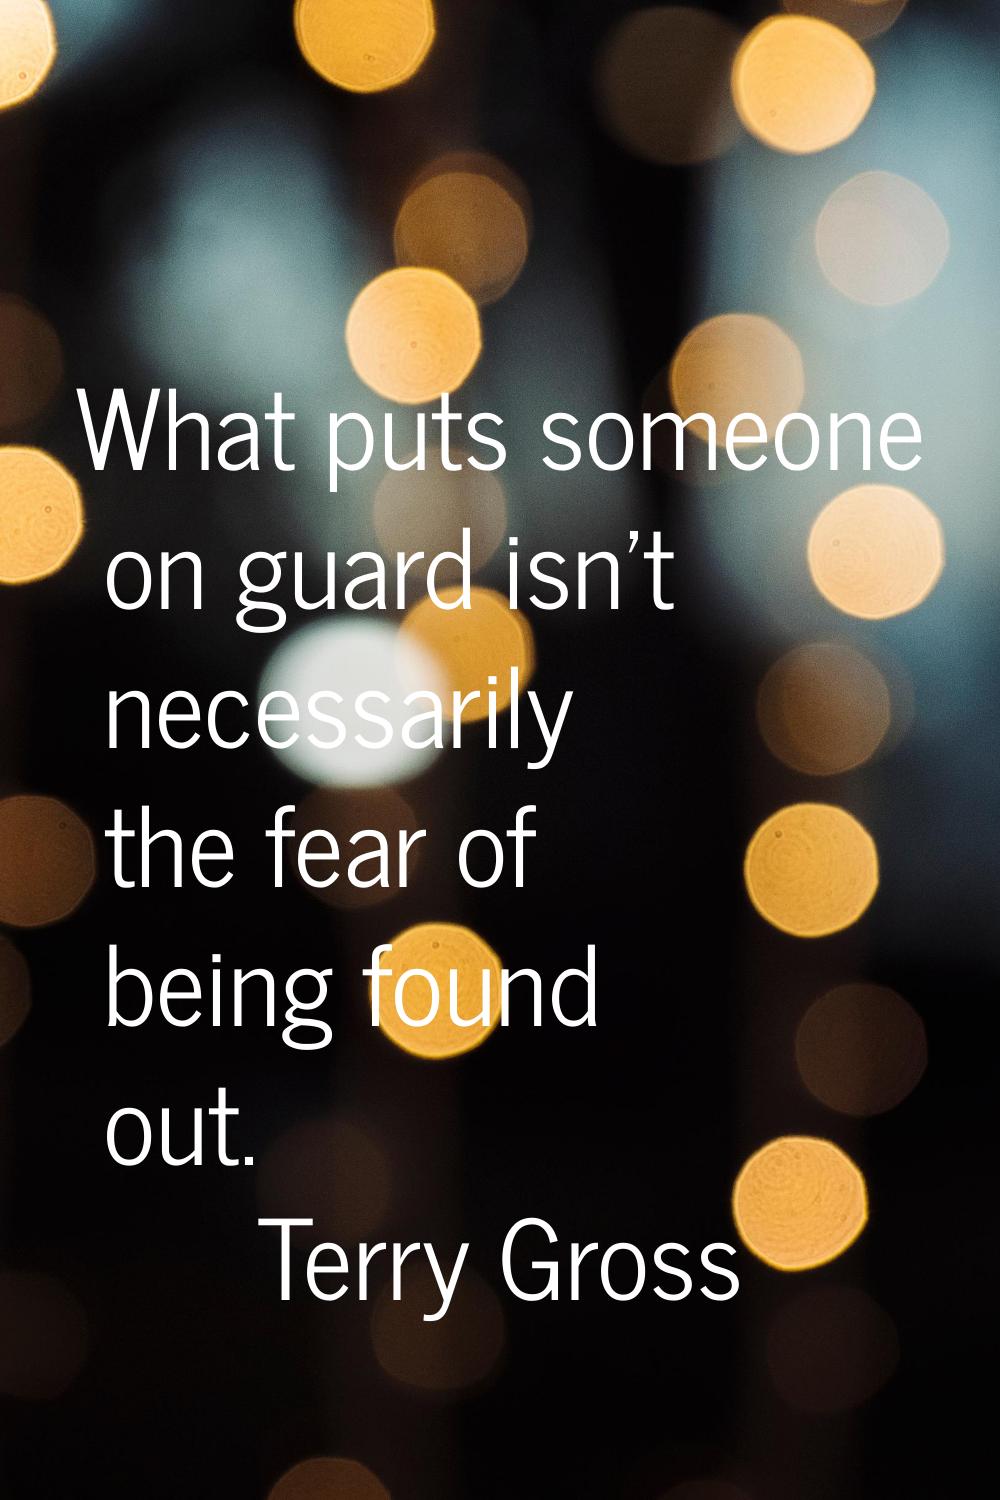 What puts someone on guard isn't necessarily the fear of being found out.